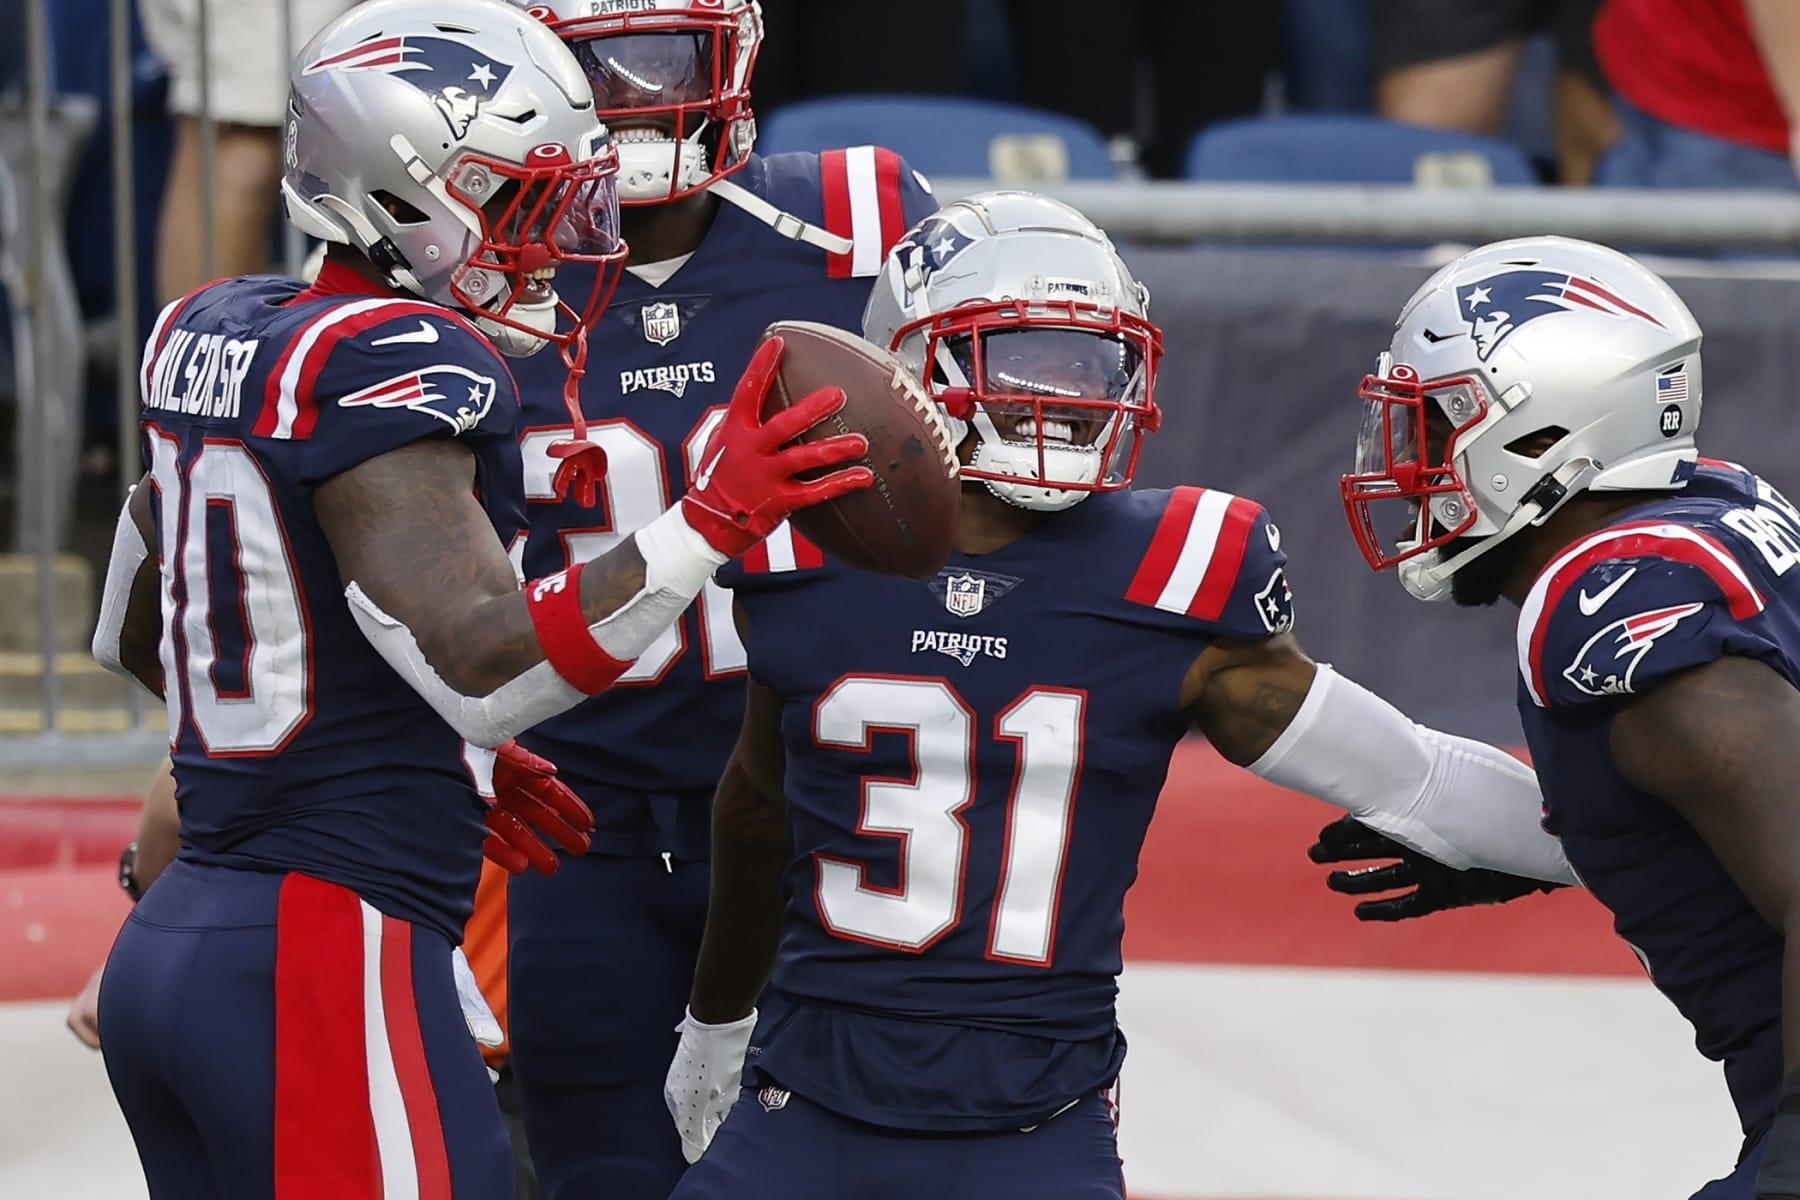 Patriots 26, Colts 3: Defense dominates as New England wins second